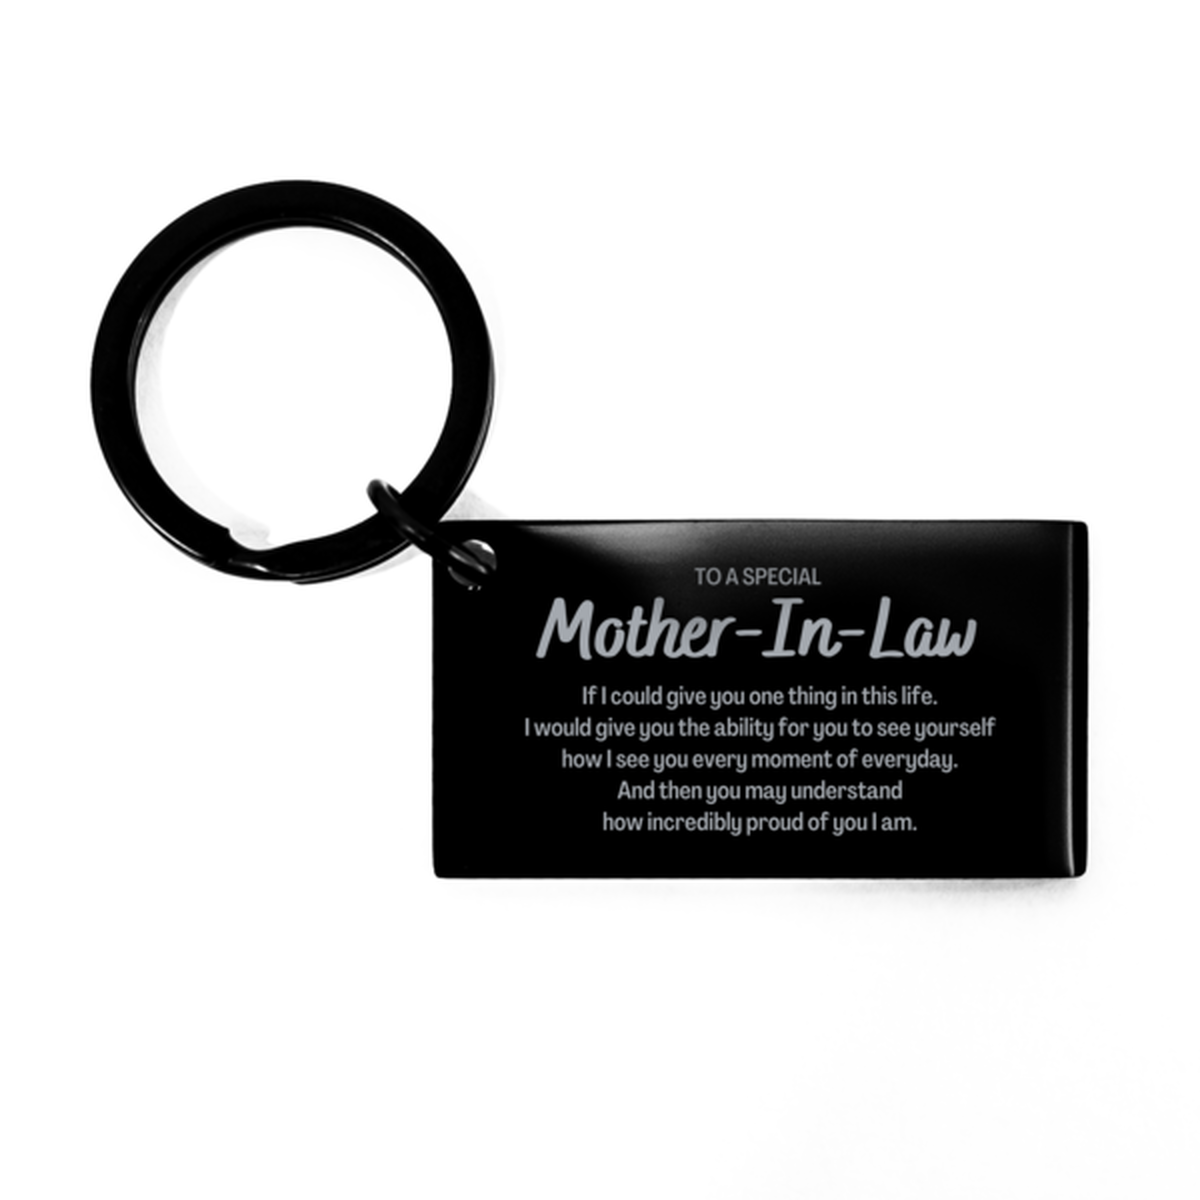 To My Mother-In-Law Keychain, Gifts For Mother-In-Law Engraved, Inspirational Gifts for Christmas Birthday, Epic Gifts for Mother-In-Law To A Special Mother-In-Law how incredibly proud of you I am